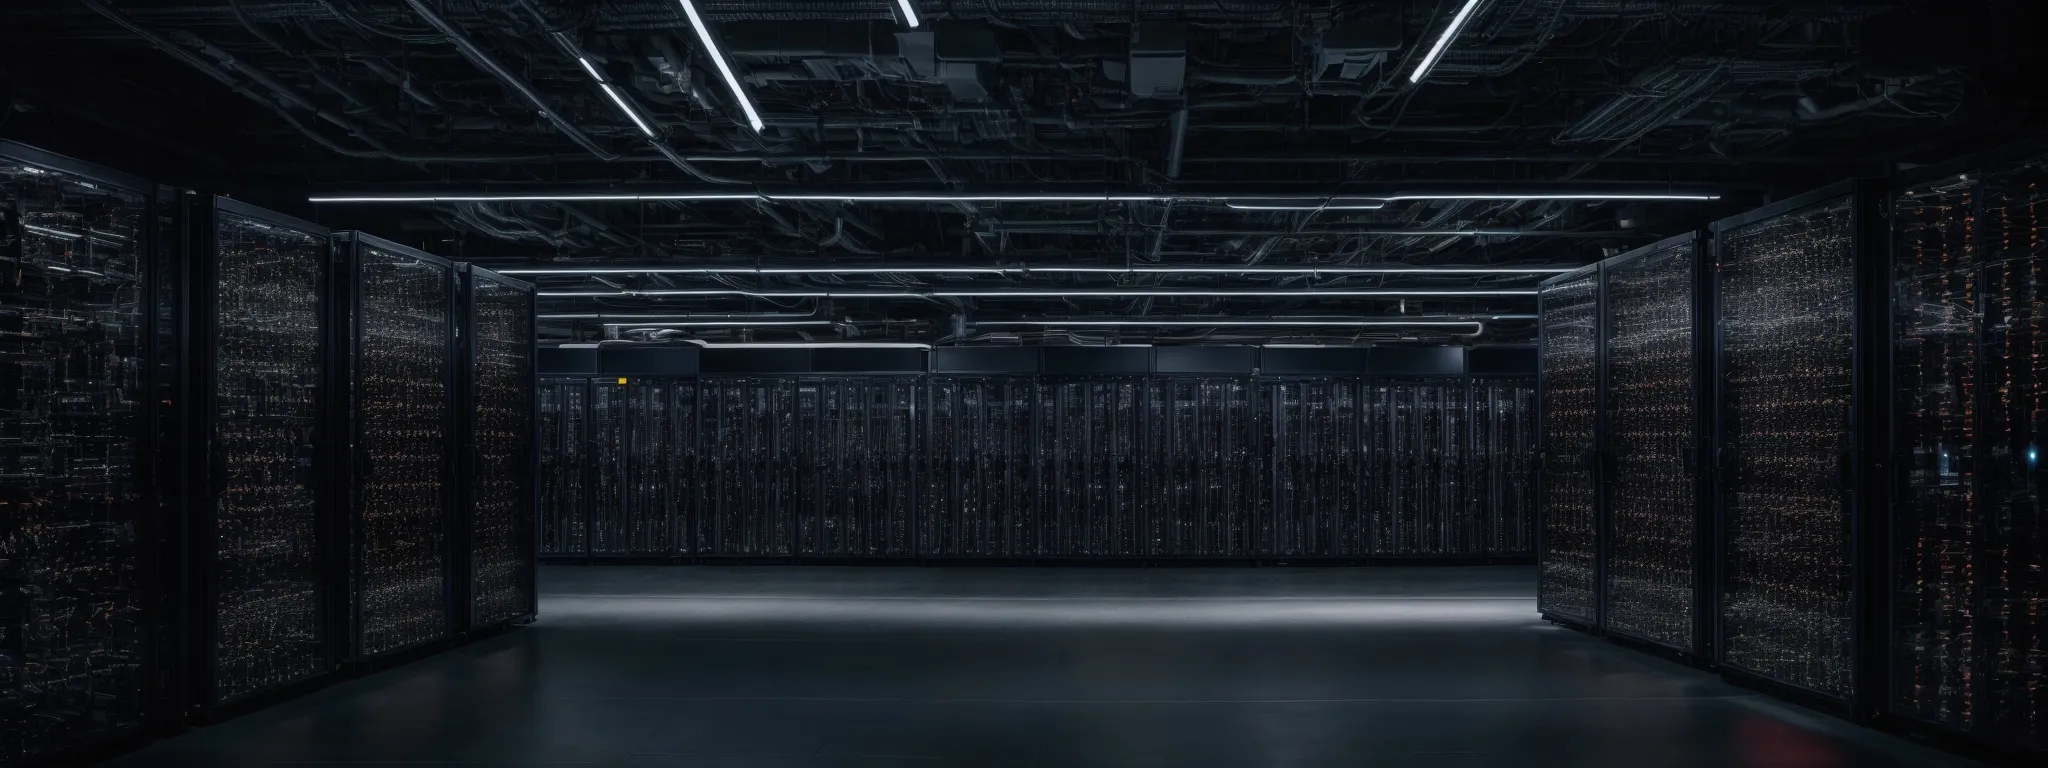 a vast server room with rows of computers and blinking lights representing google's expansive data infrastructure.